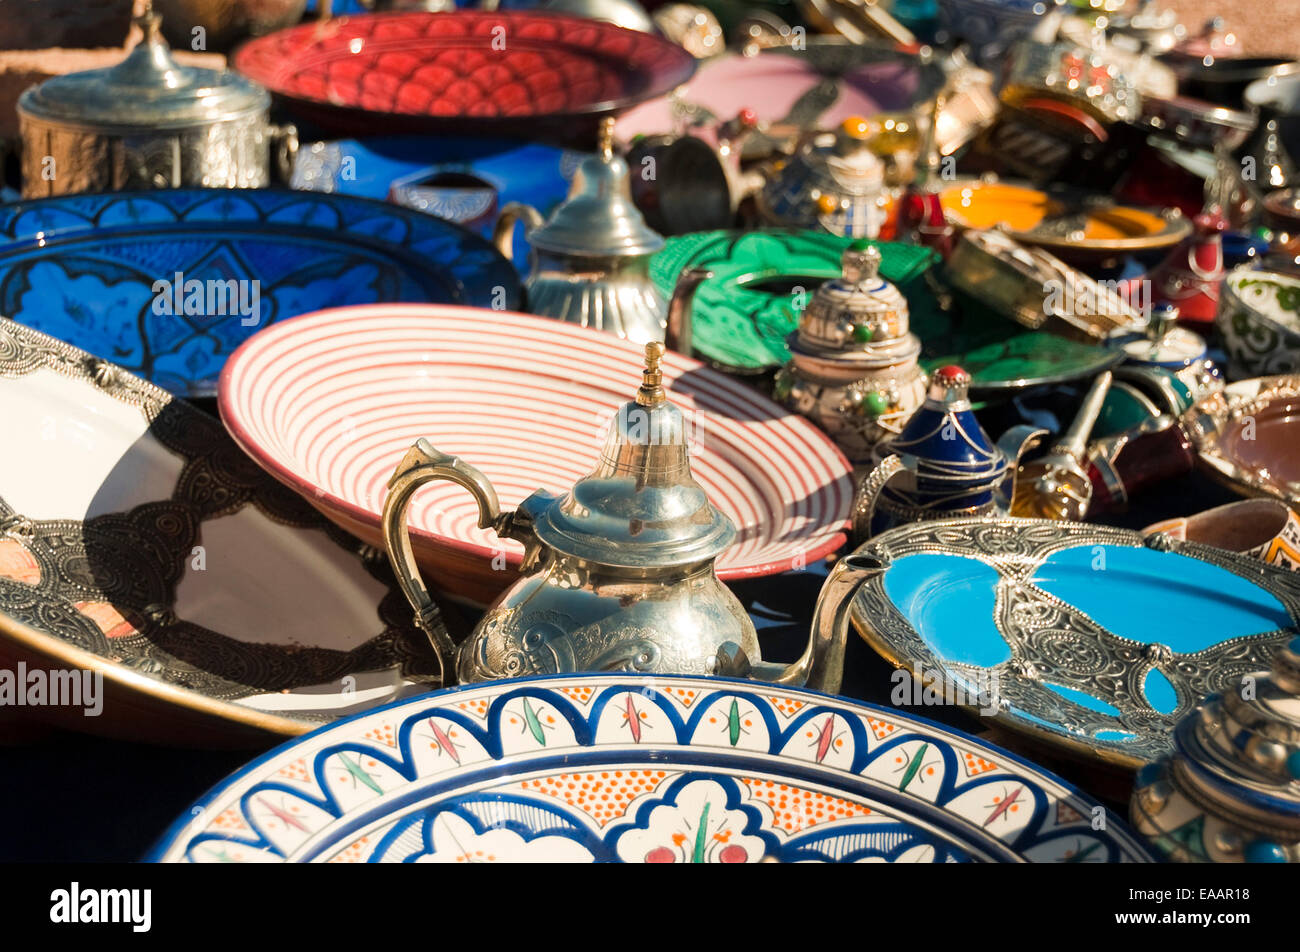 Horizontal close up of traditional gifts and handicrafts on sale on the roadside in Morocco. Stock Photo